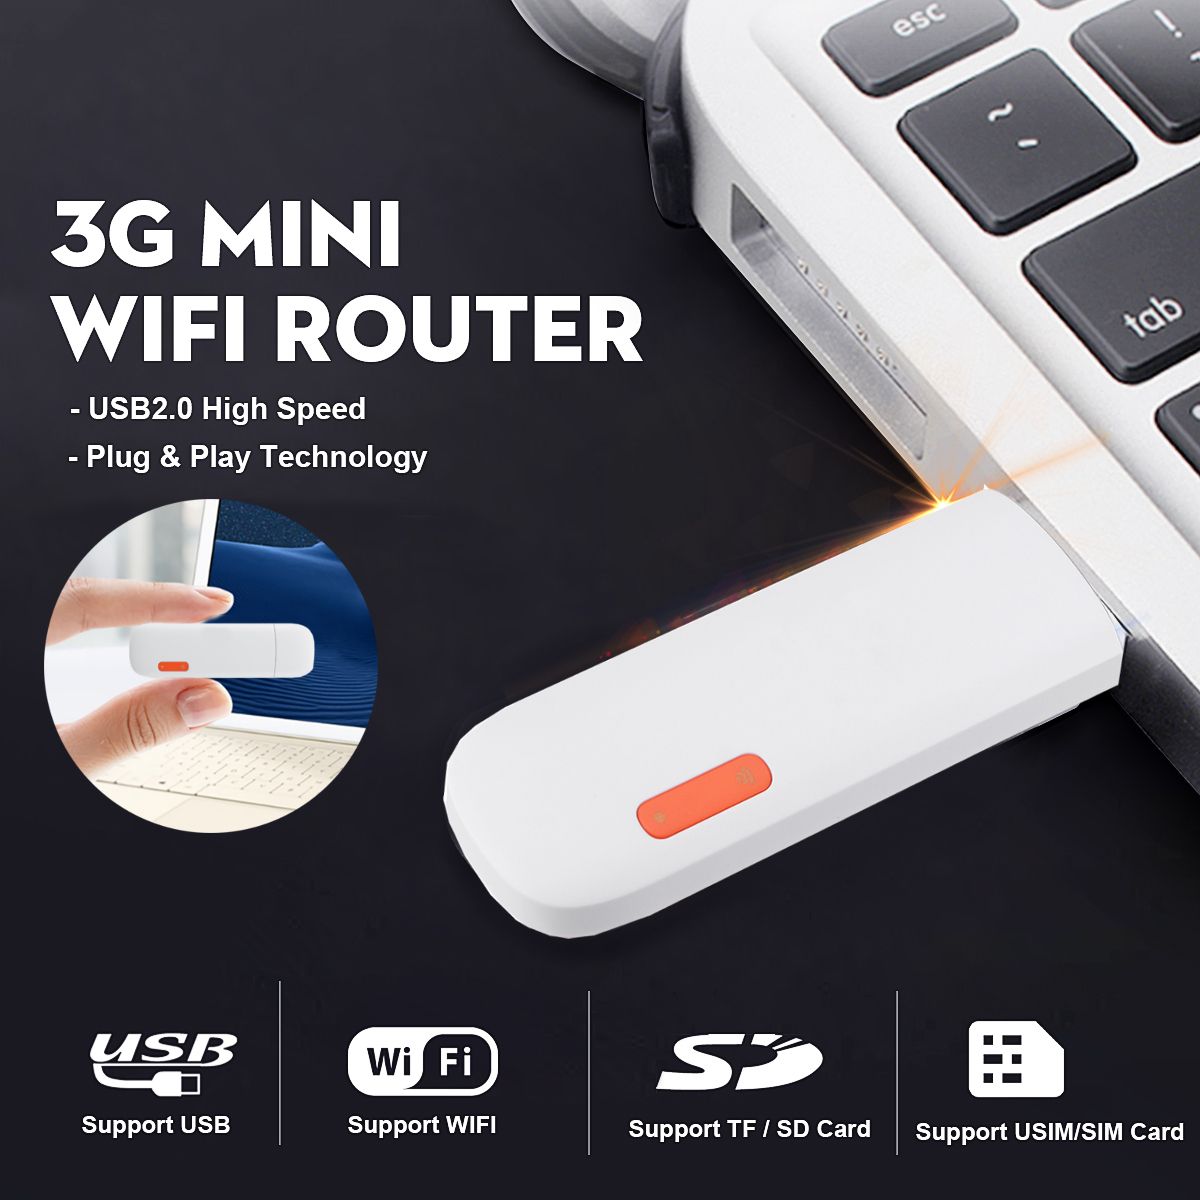 Mimi-3G-Wireless-Router-Dual-Band-24G-5G-USB20-Port-Wifi-Router-Support-SIM-TF-SD-Card-1758716